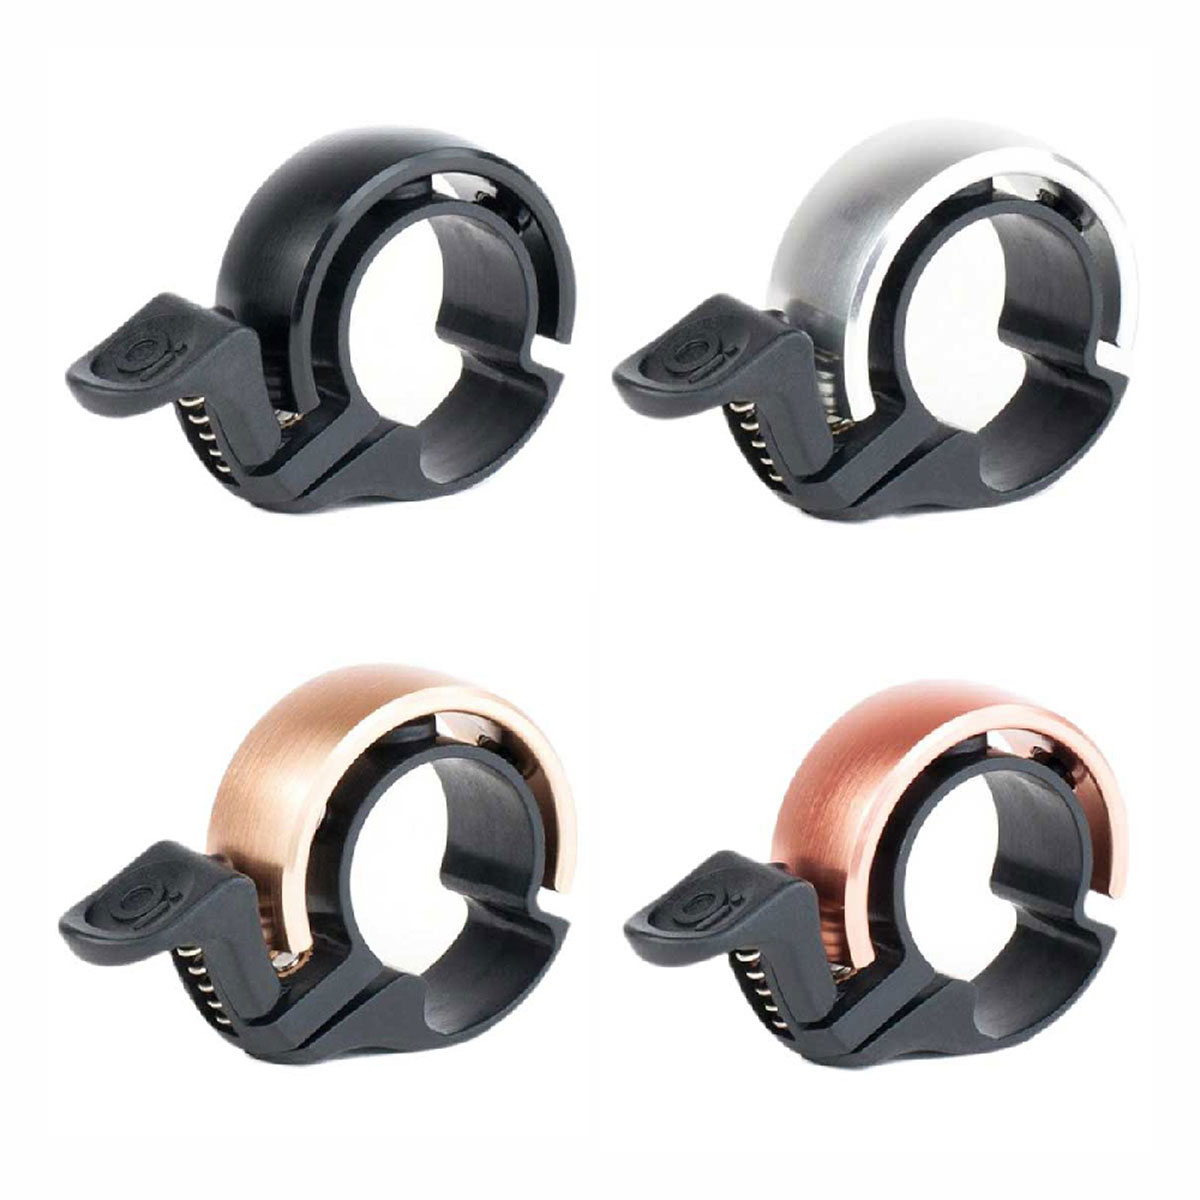 Classic Bicycle Bell Knog Oi Large Or Small Choice Of 4 Colors